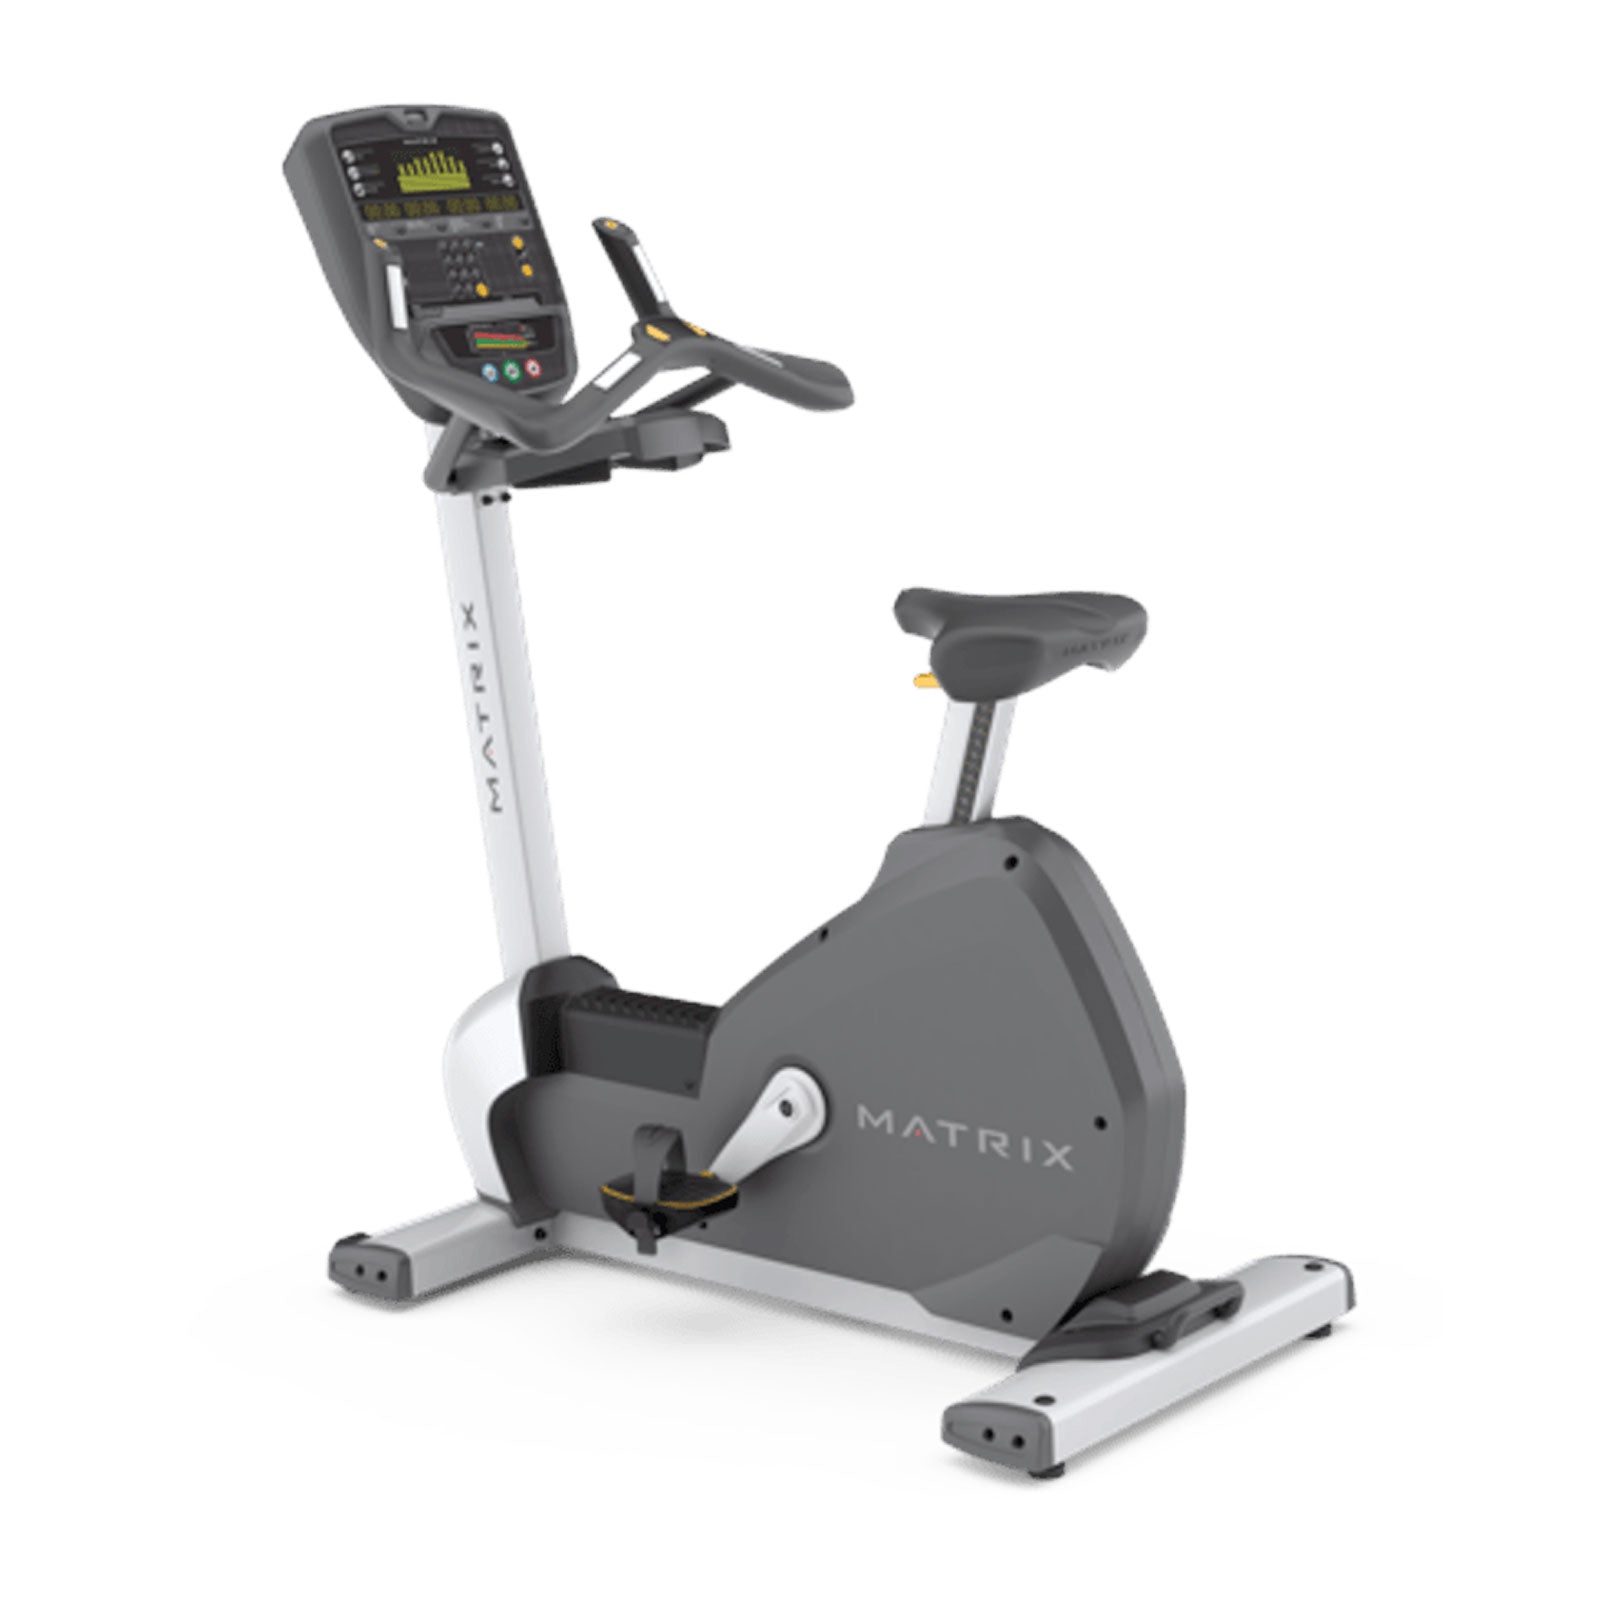 a complete gym upright cycle machine with all components